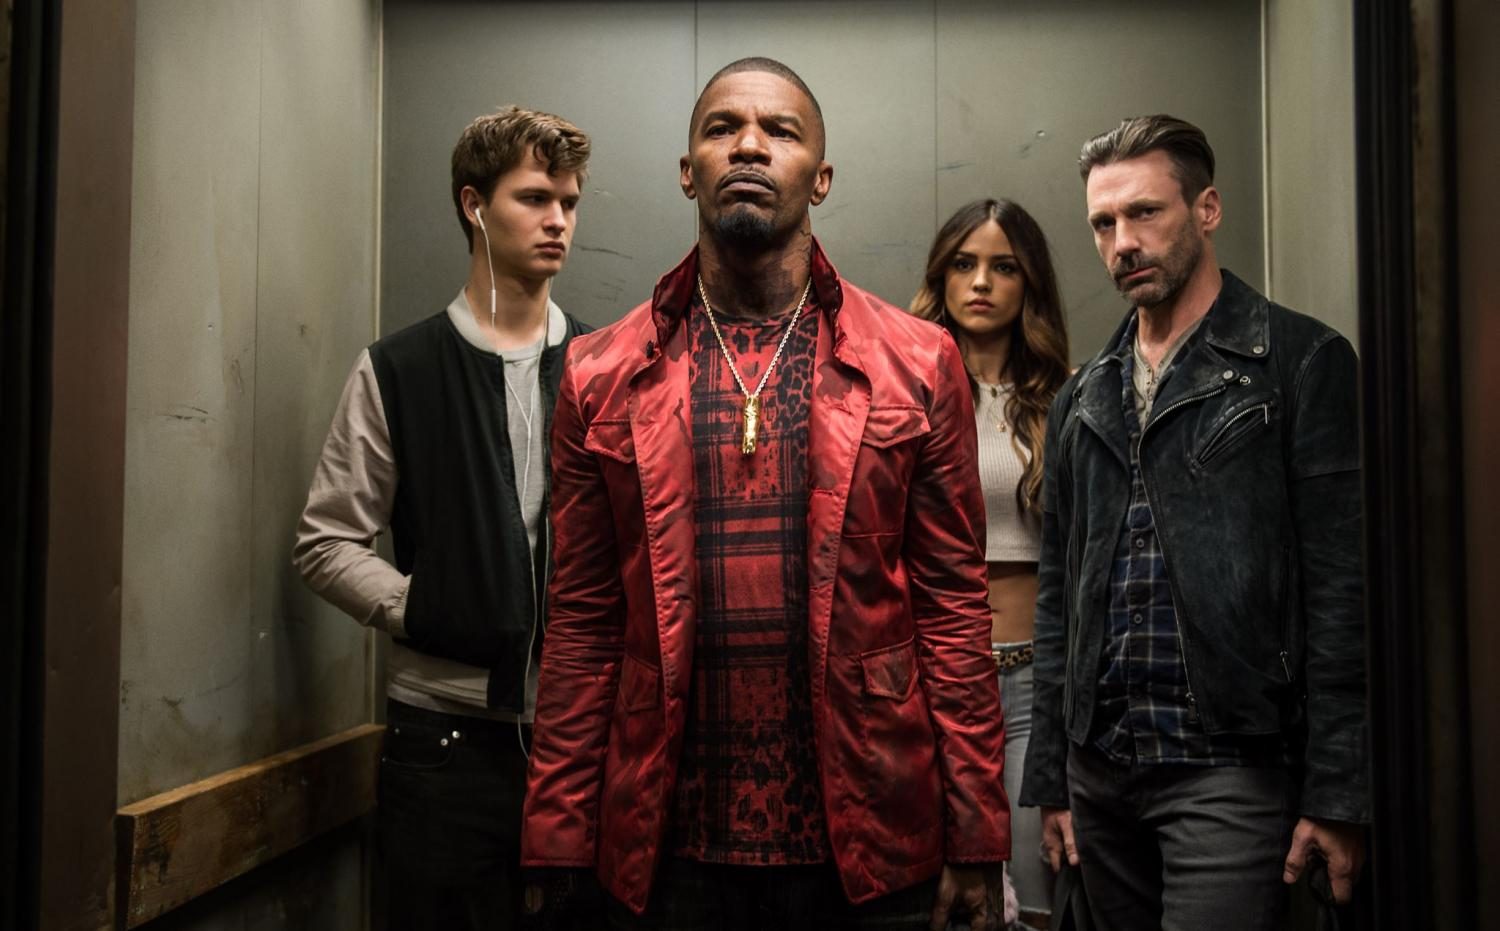 “Baby Driver”, starring Ansel Elgort and Kevin Spacey, is about a major crime boss and his getaway driver.